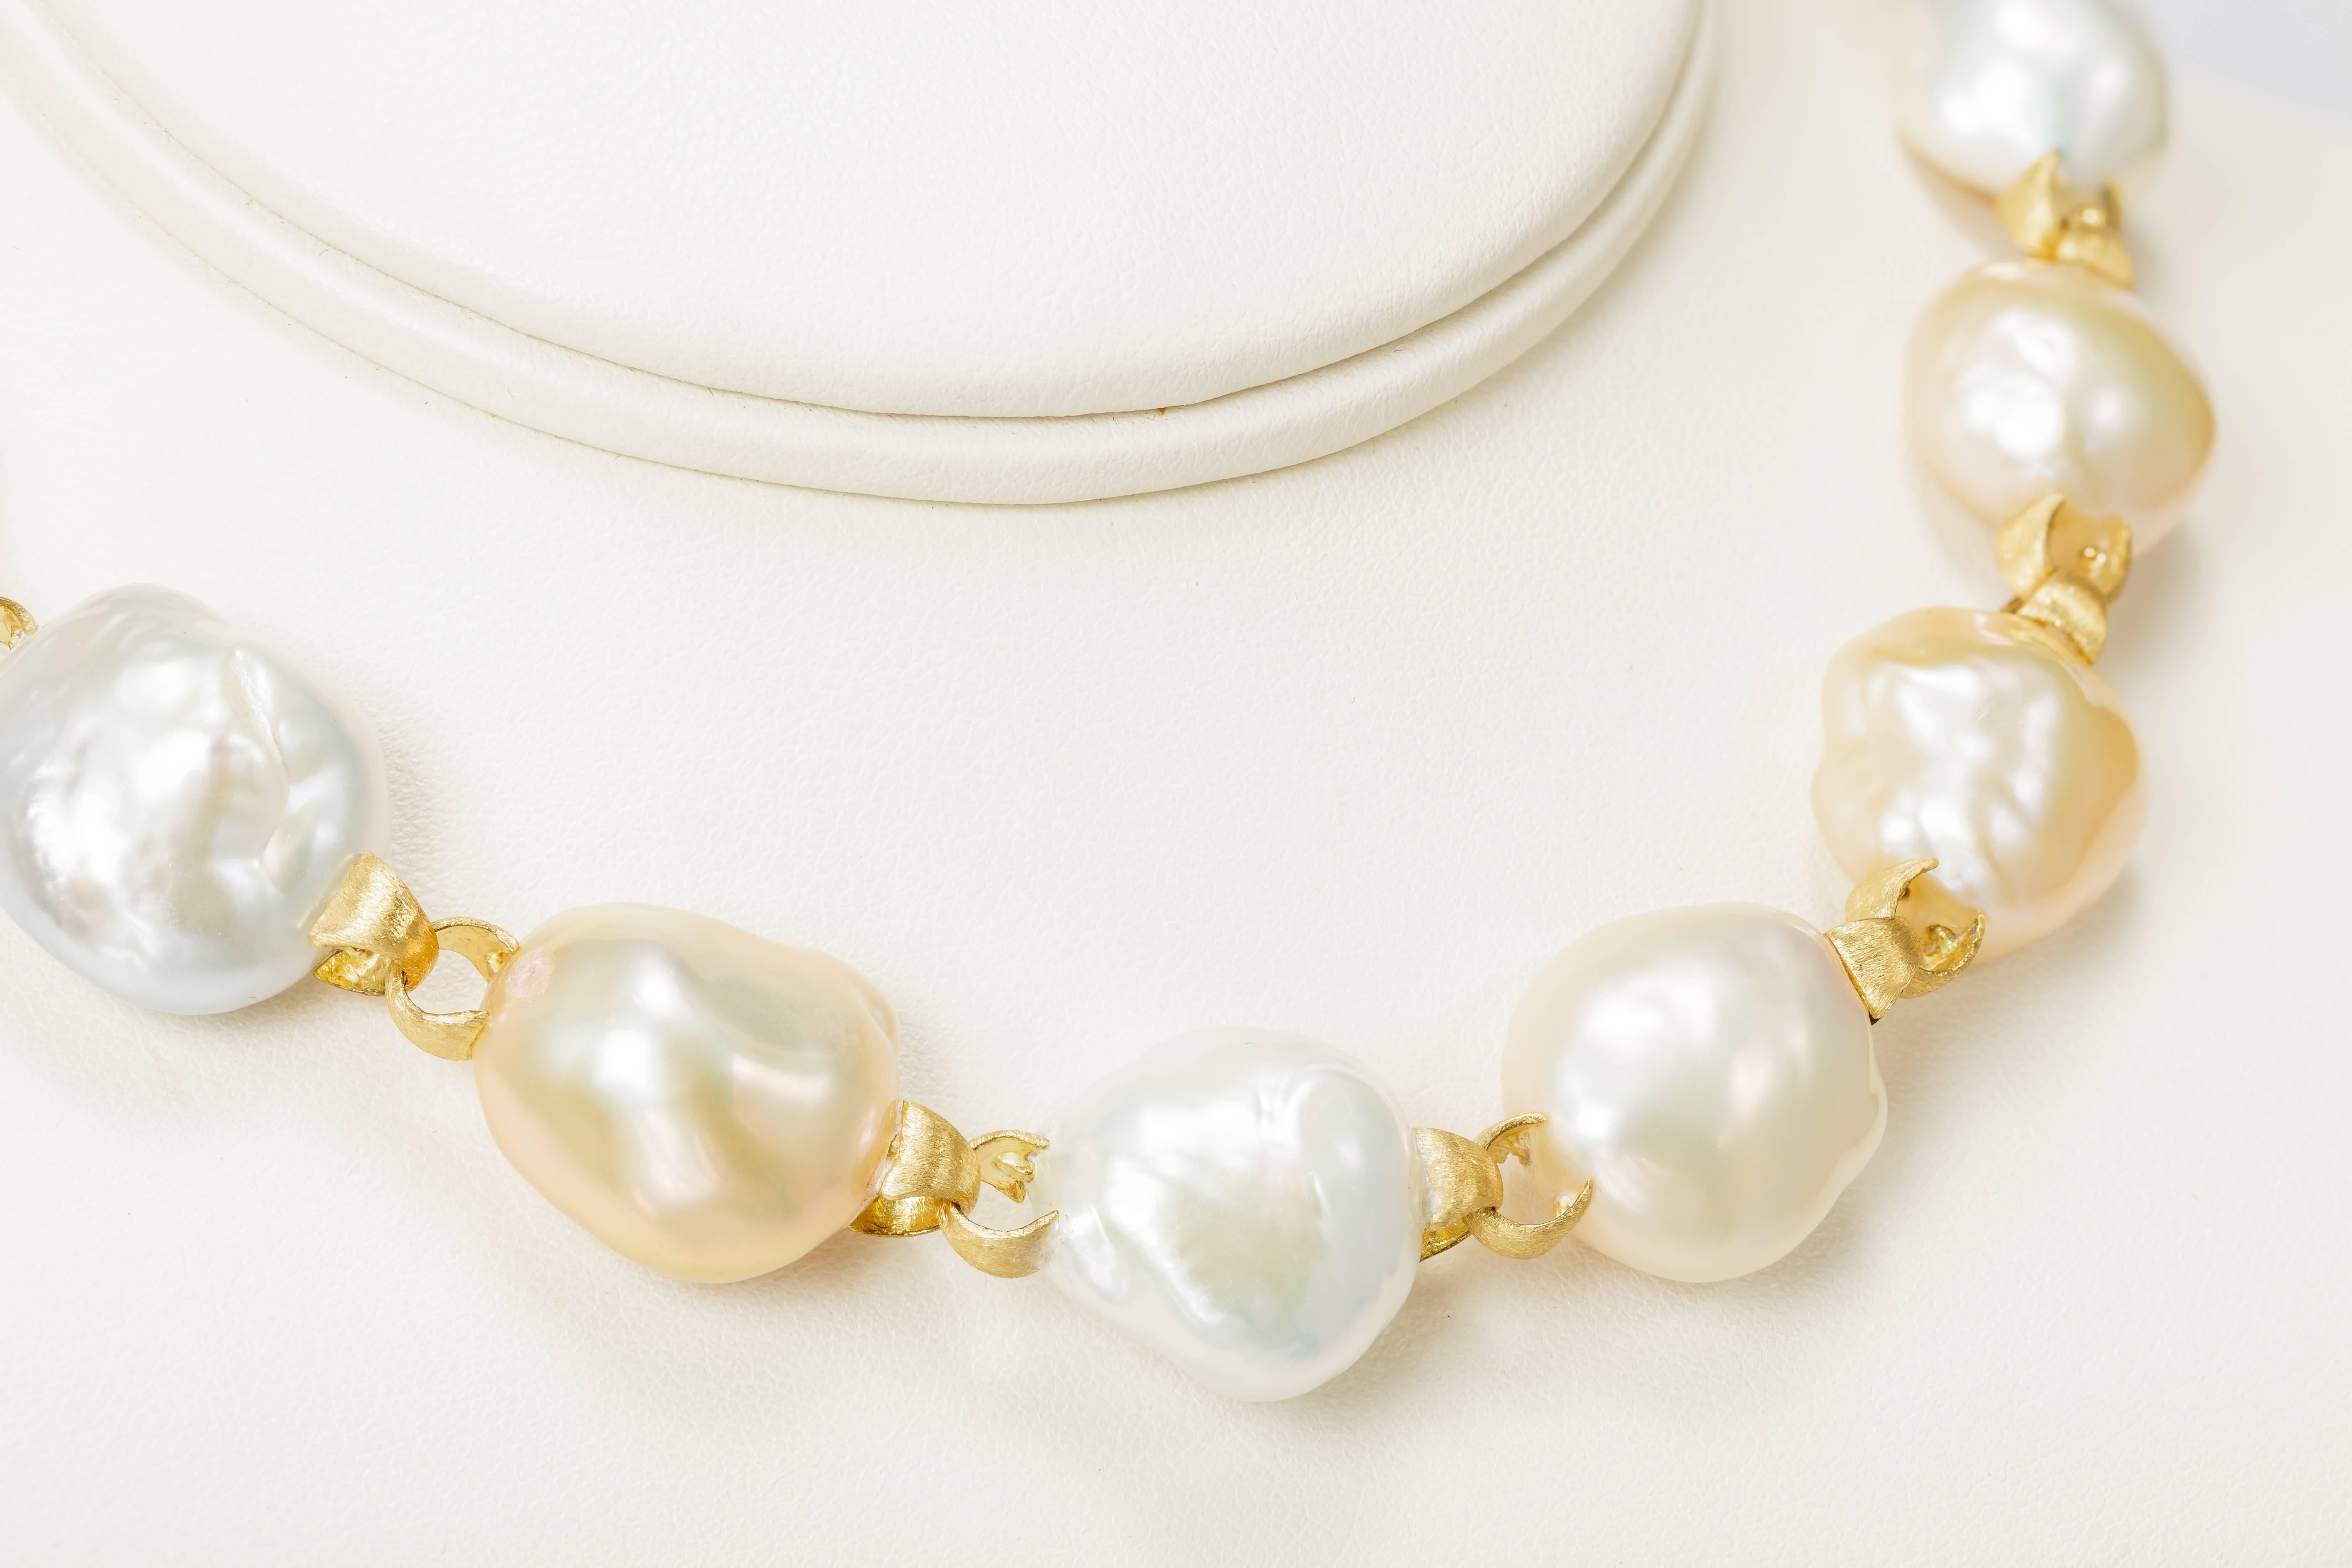 Yvel Multicolored Baroque Pearl Strand Necklace 18 Karat Yellow Gold In New Condition For Sale In Houston, TX